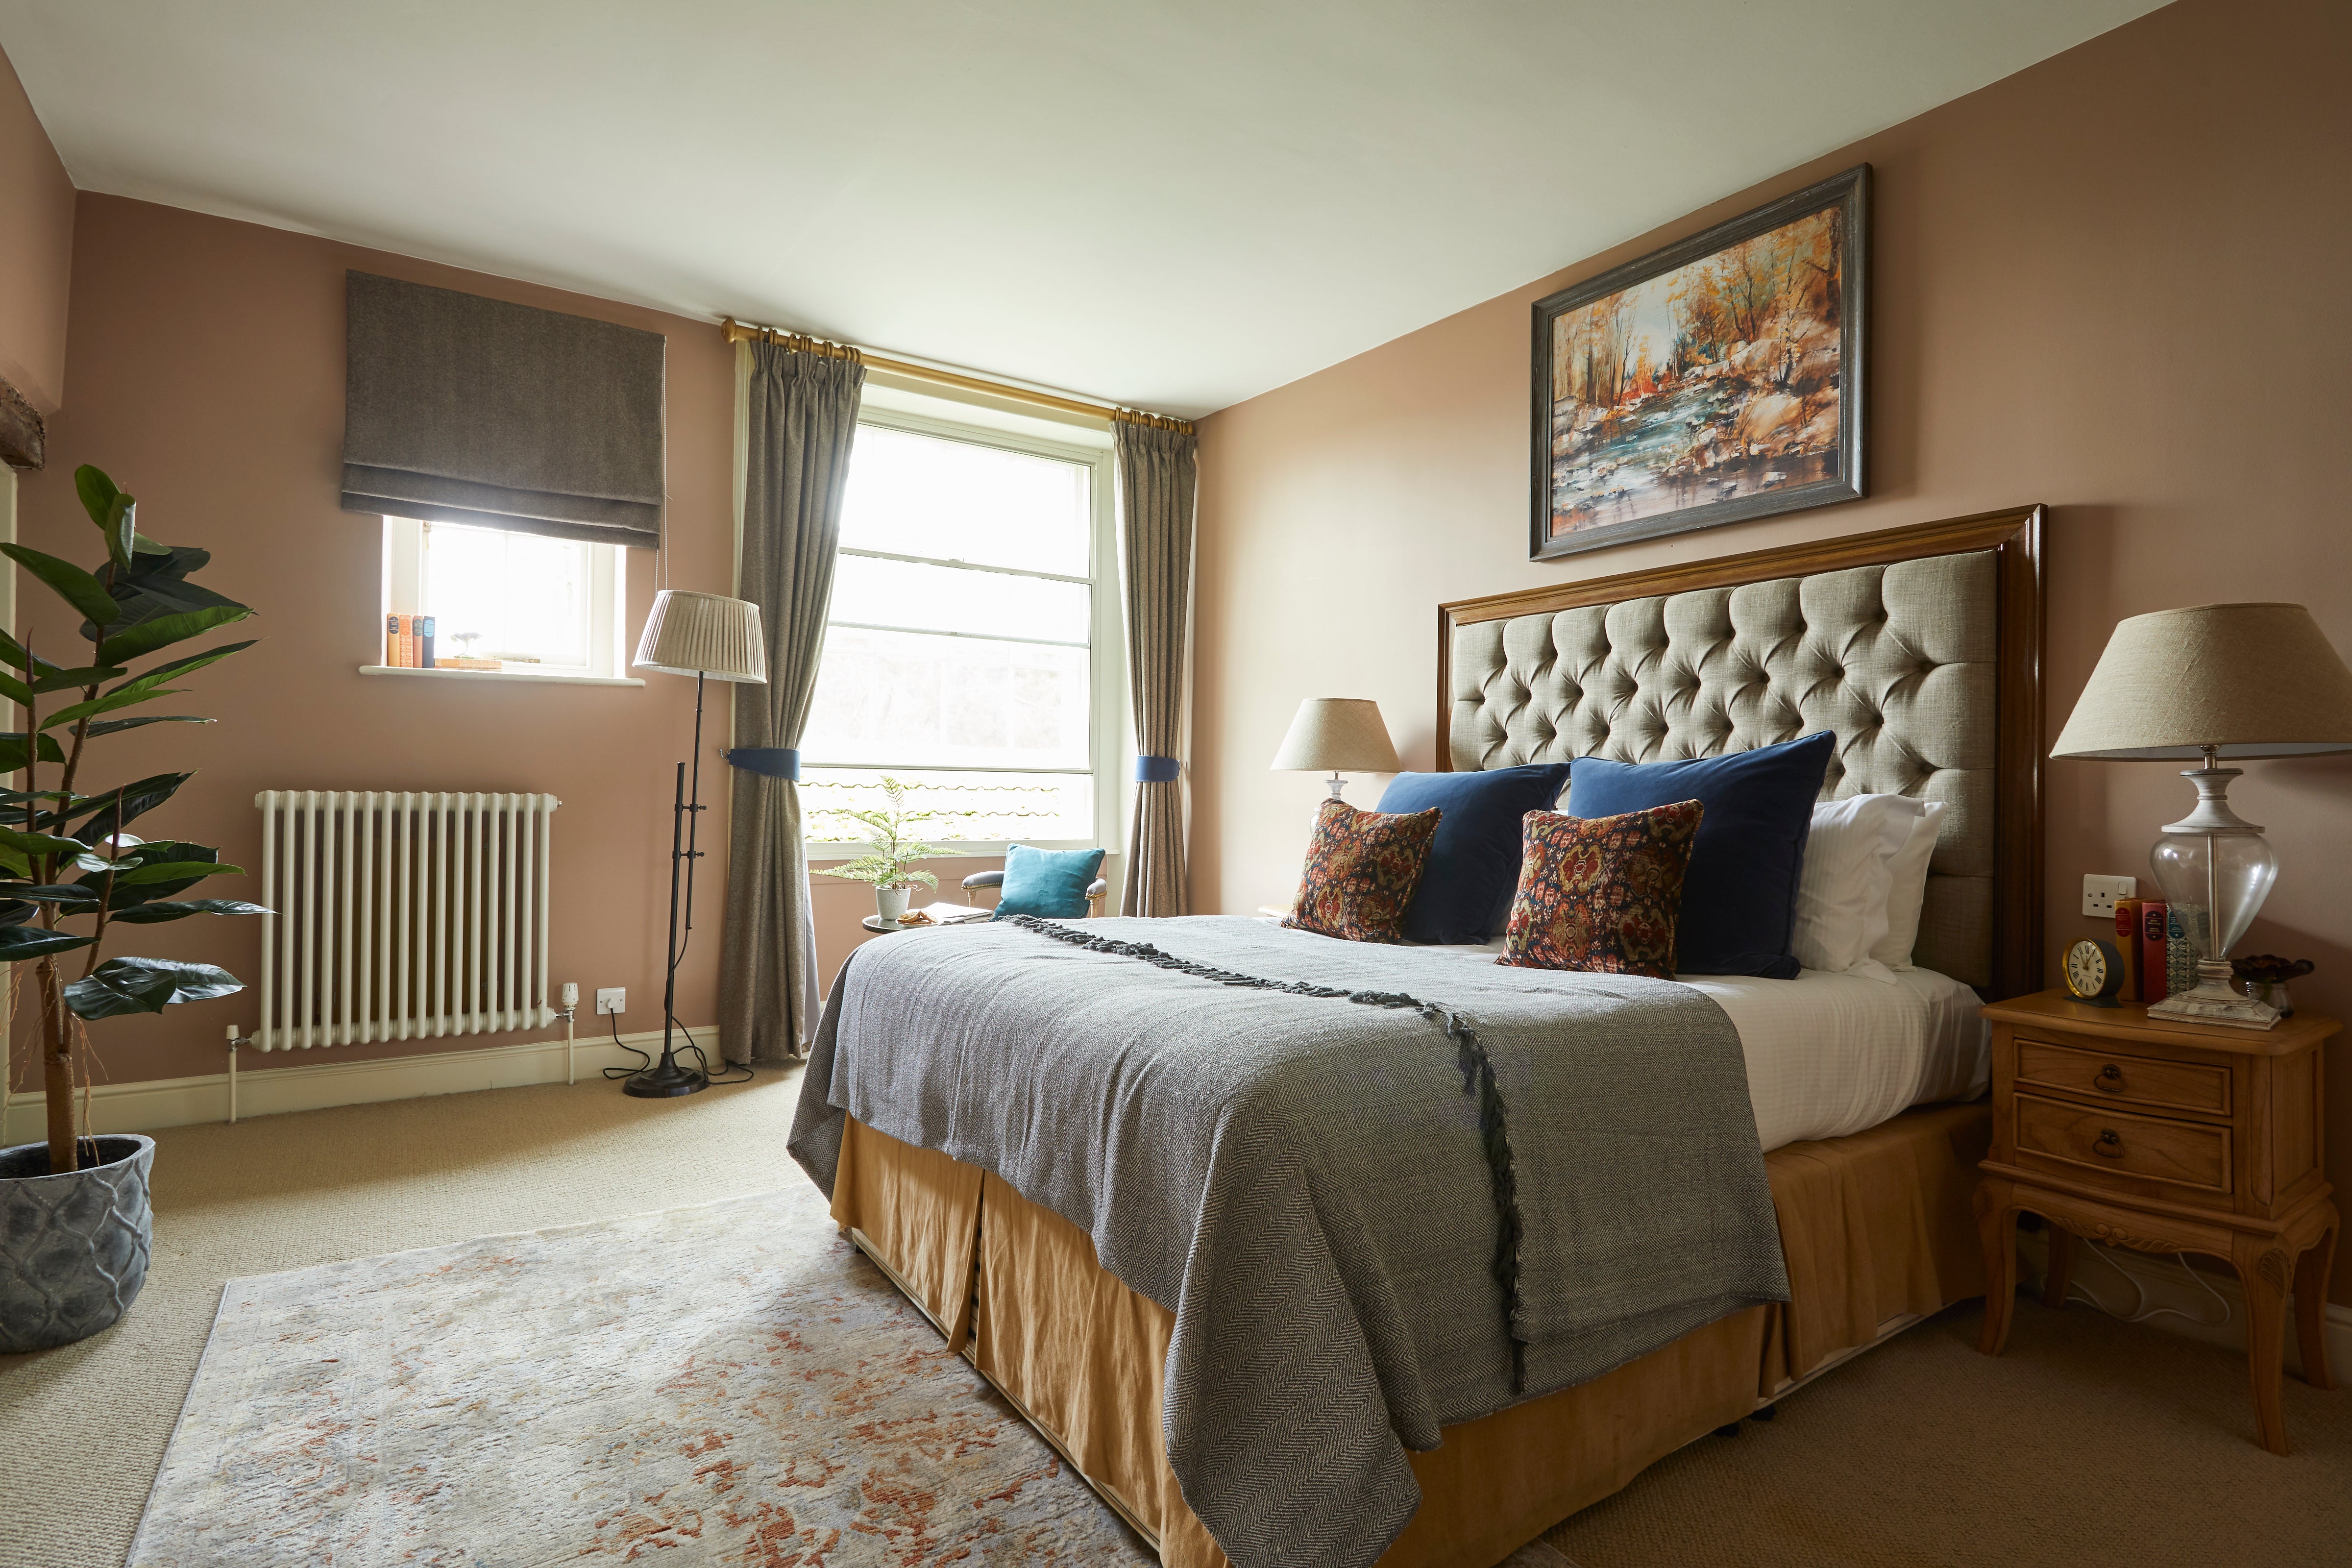 Look forward to gorgeously styled rooms, with patterned wallpaper and velvet upholstery